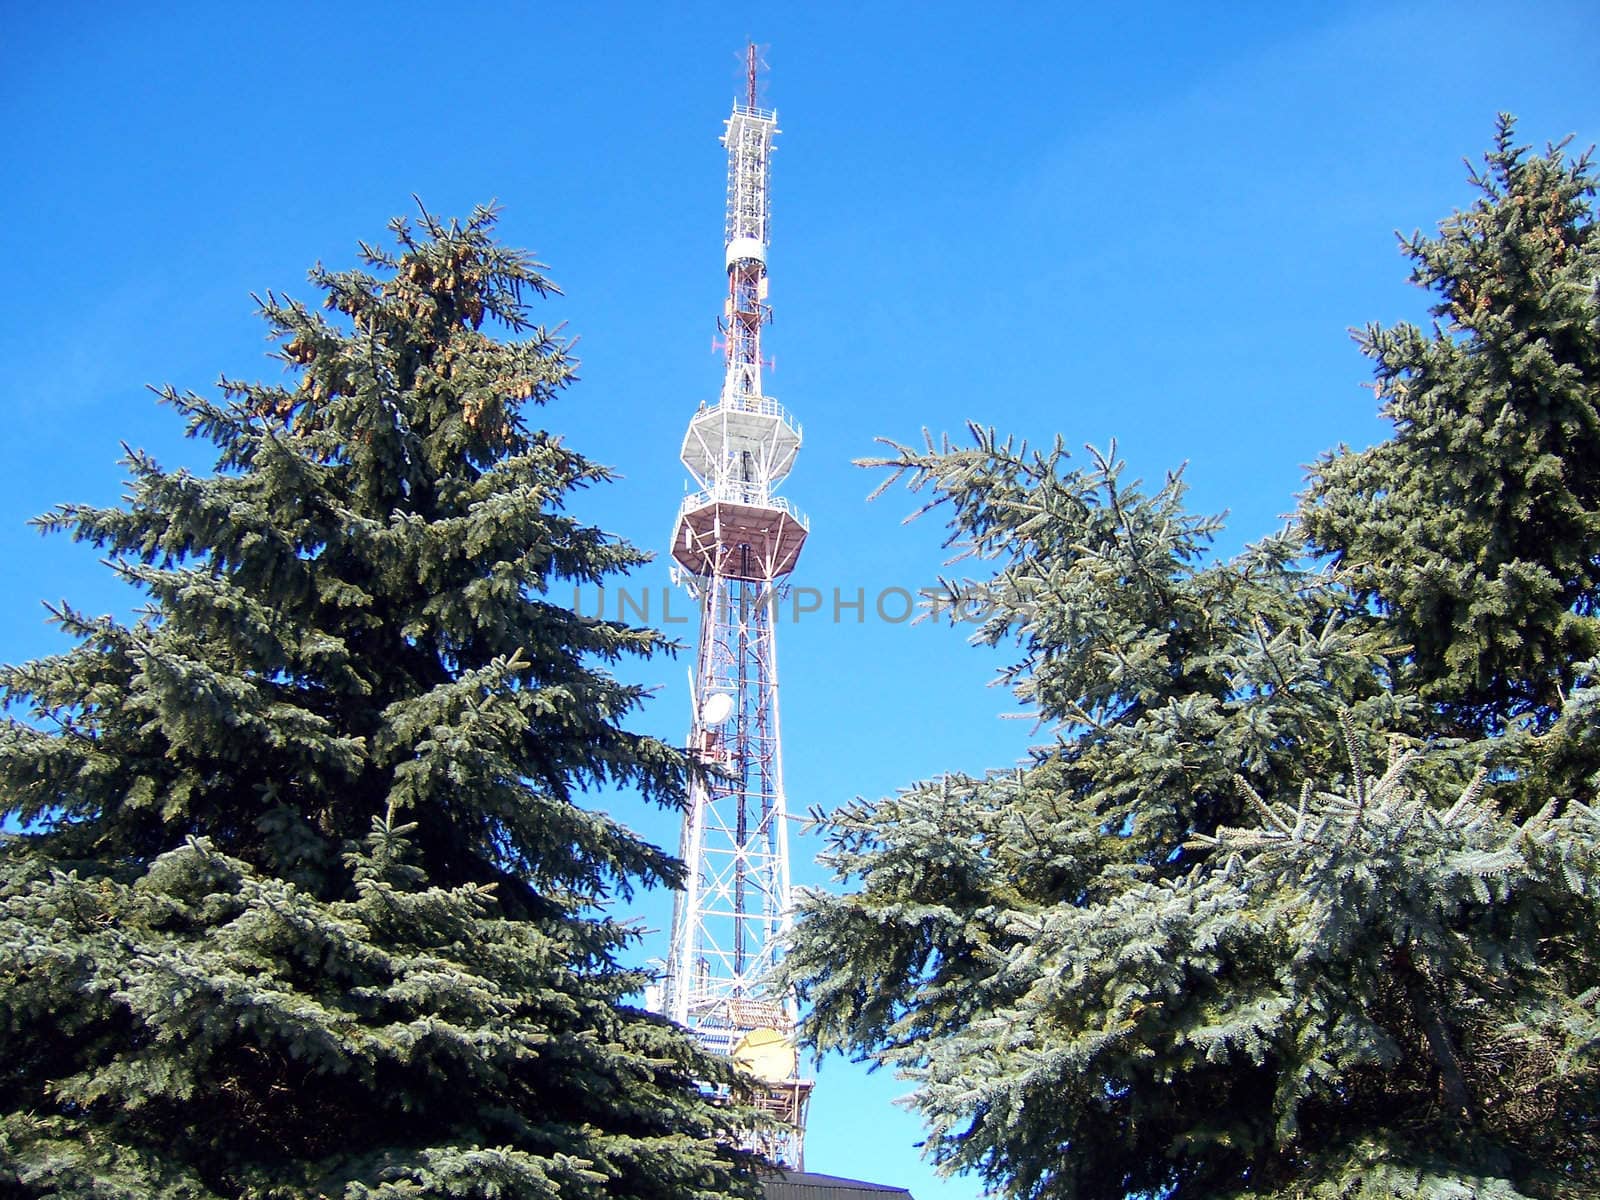 Pines and telecommunications tower on blue sky background